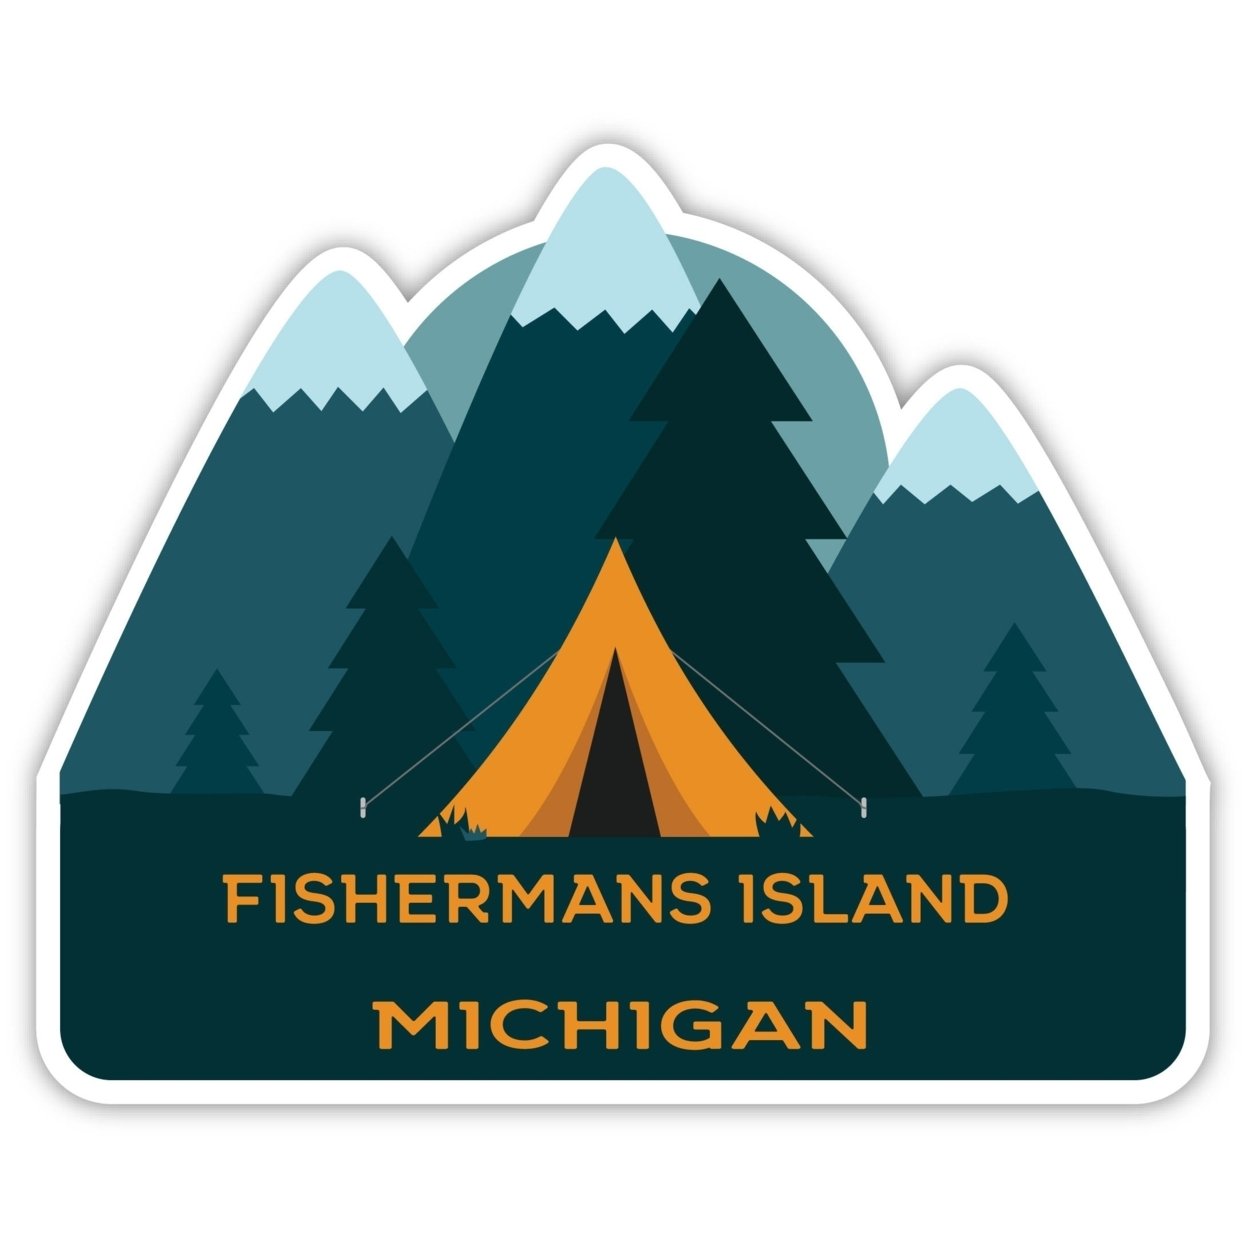 Fishermans Island Michigan Souvenir Decorative Stickers (Choose Theme And Size) - 4-Pack, 8-Inch, Tent